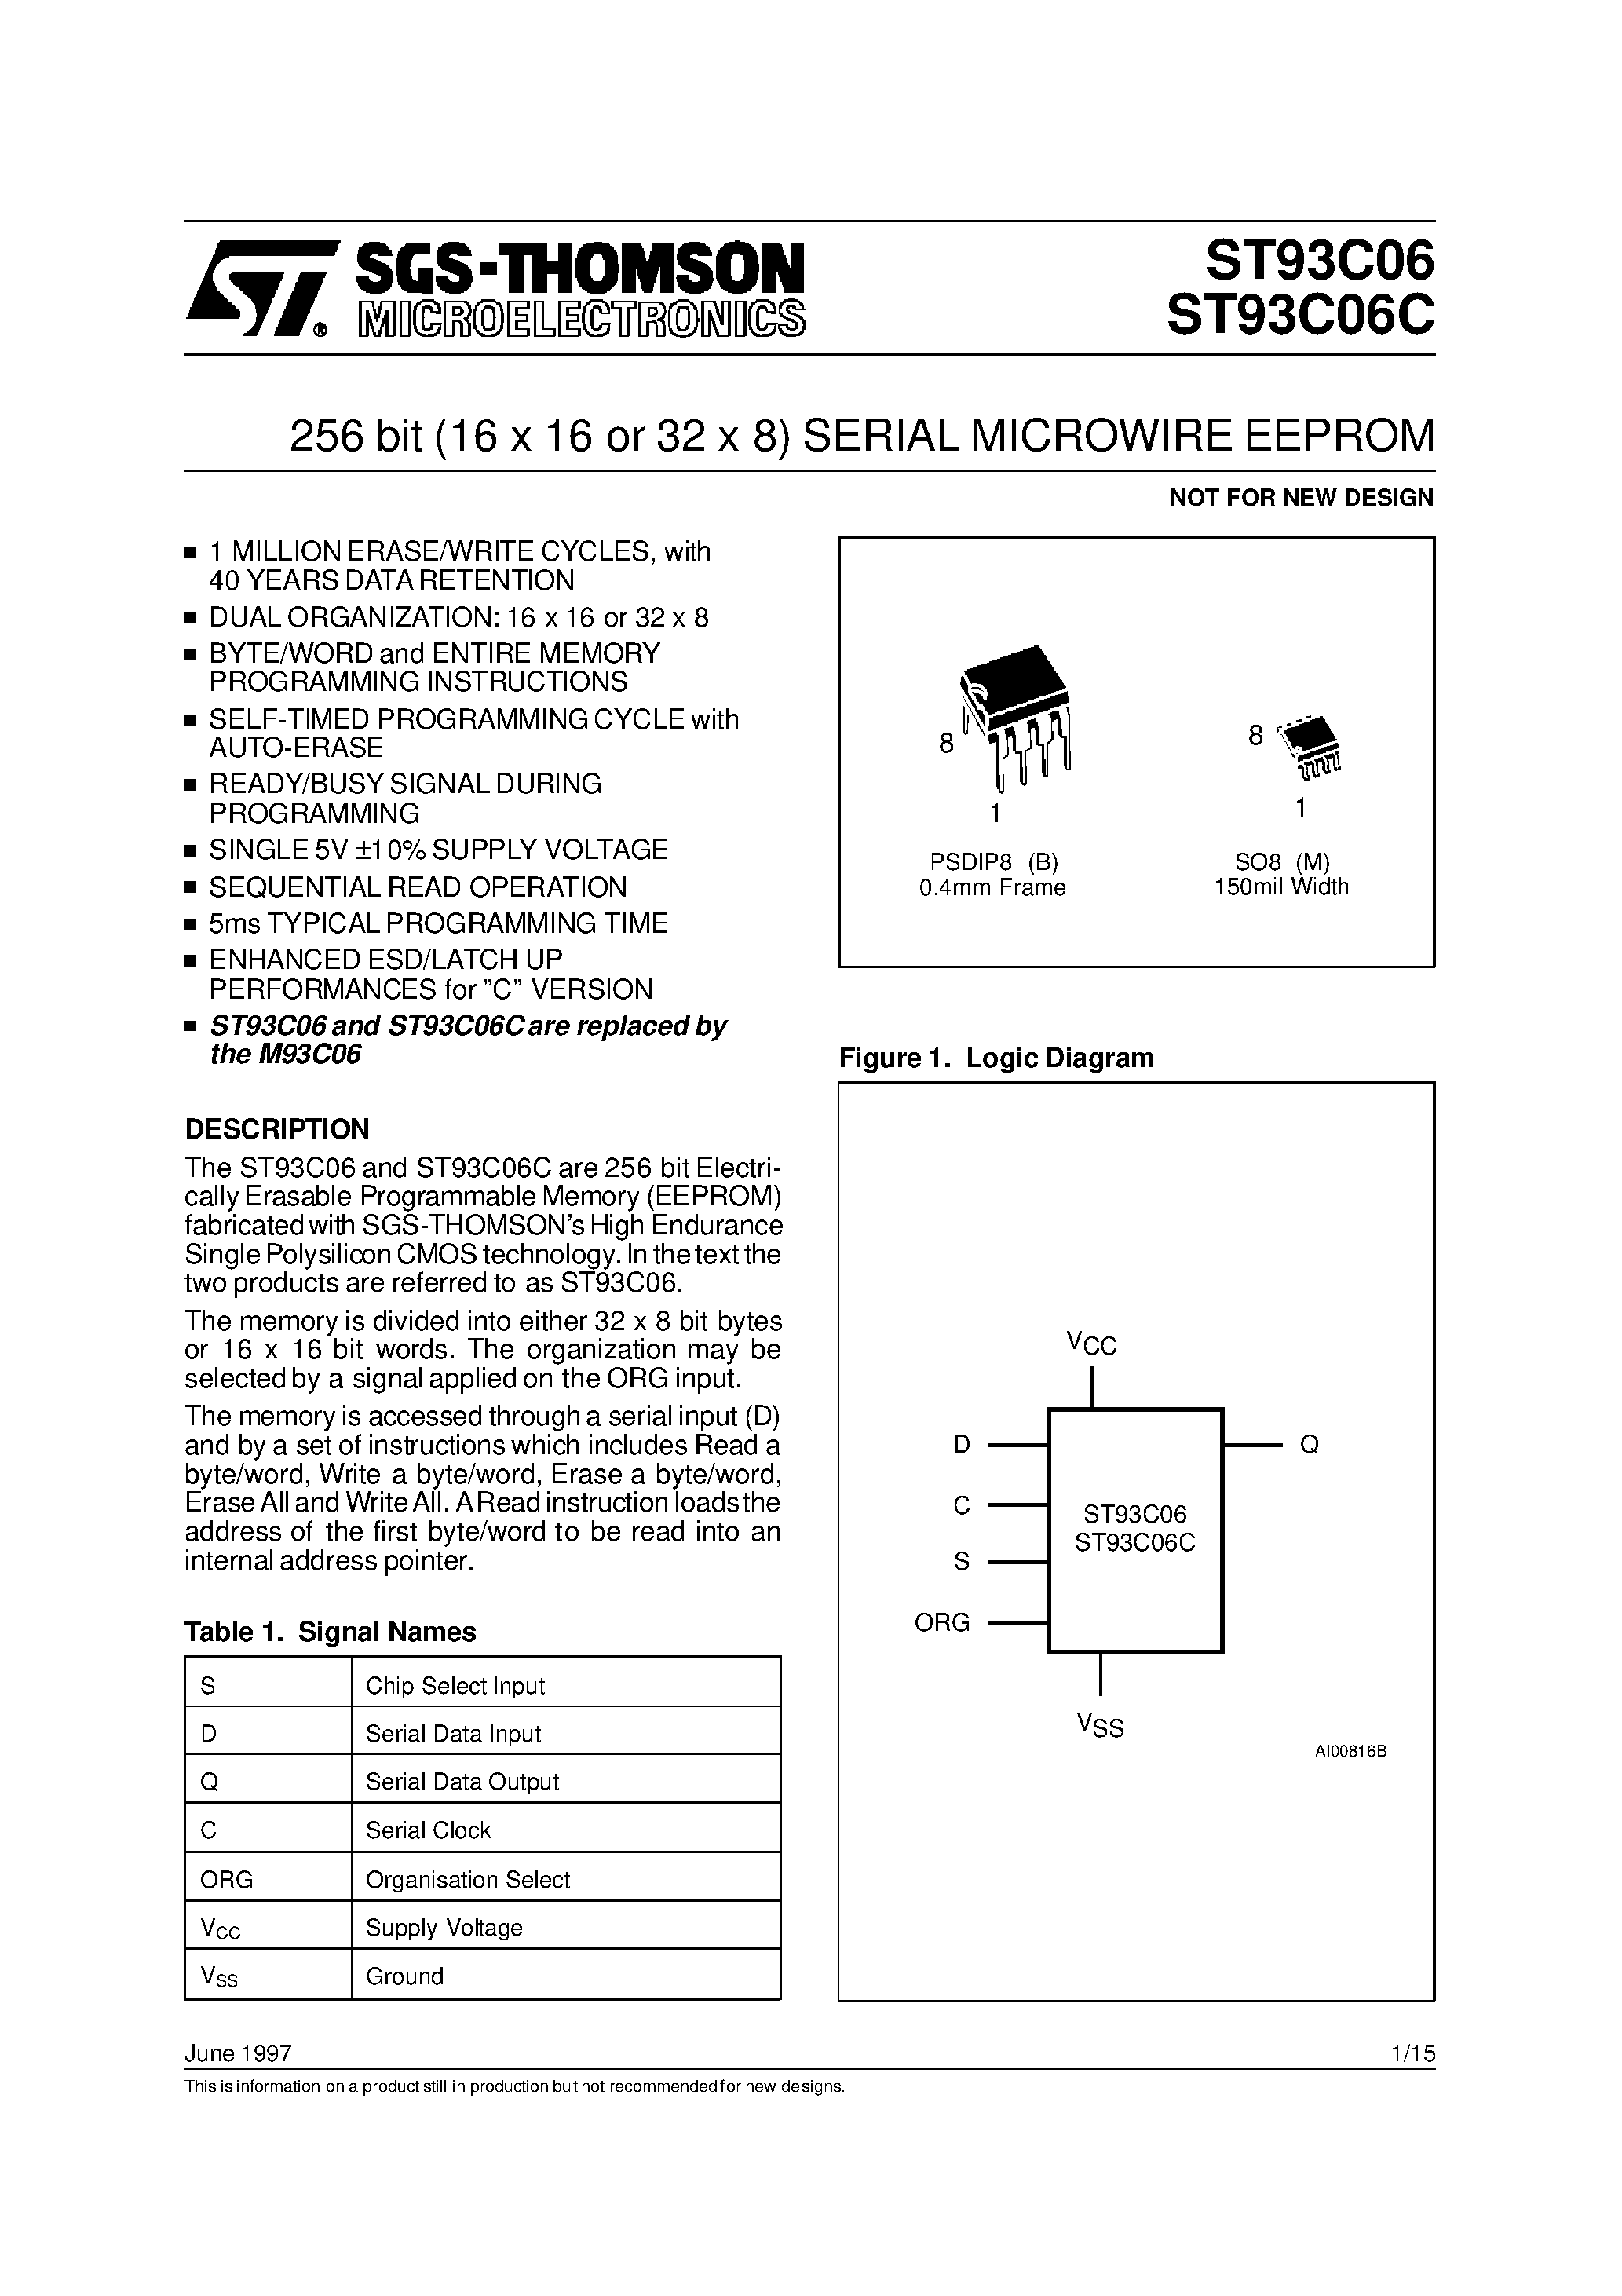 Datasheet ST93C06 - 256 bit 16 x 16 or 32 x 8 SERIAL MICROWIRE EEPROM page 1